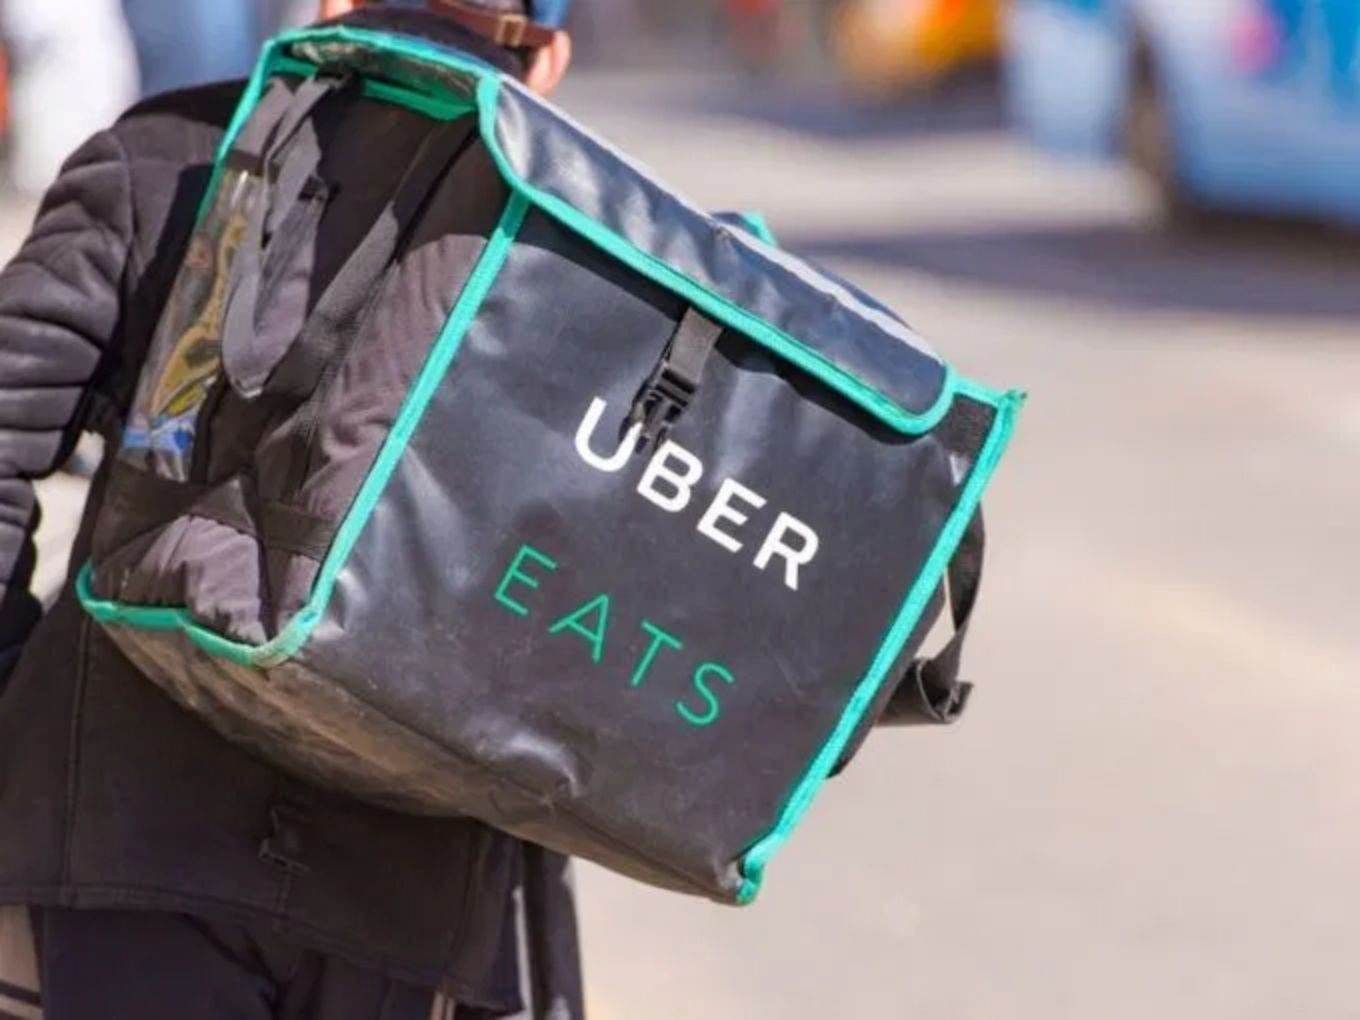 Uber Eats Acquisition Impacts Jobs Of 245 Employees